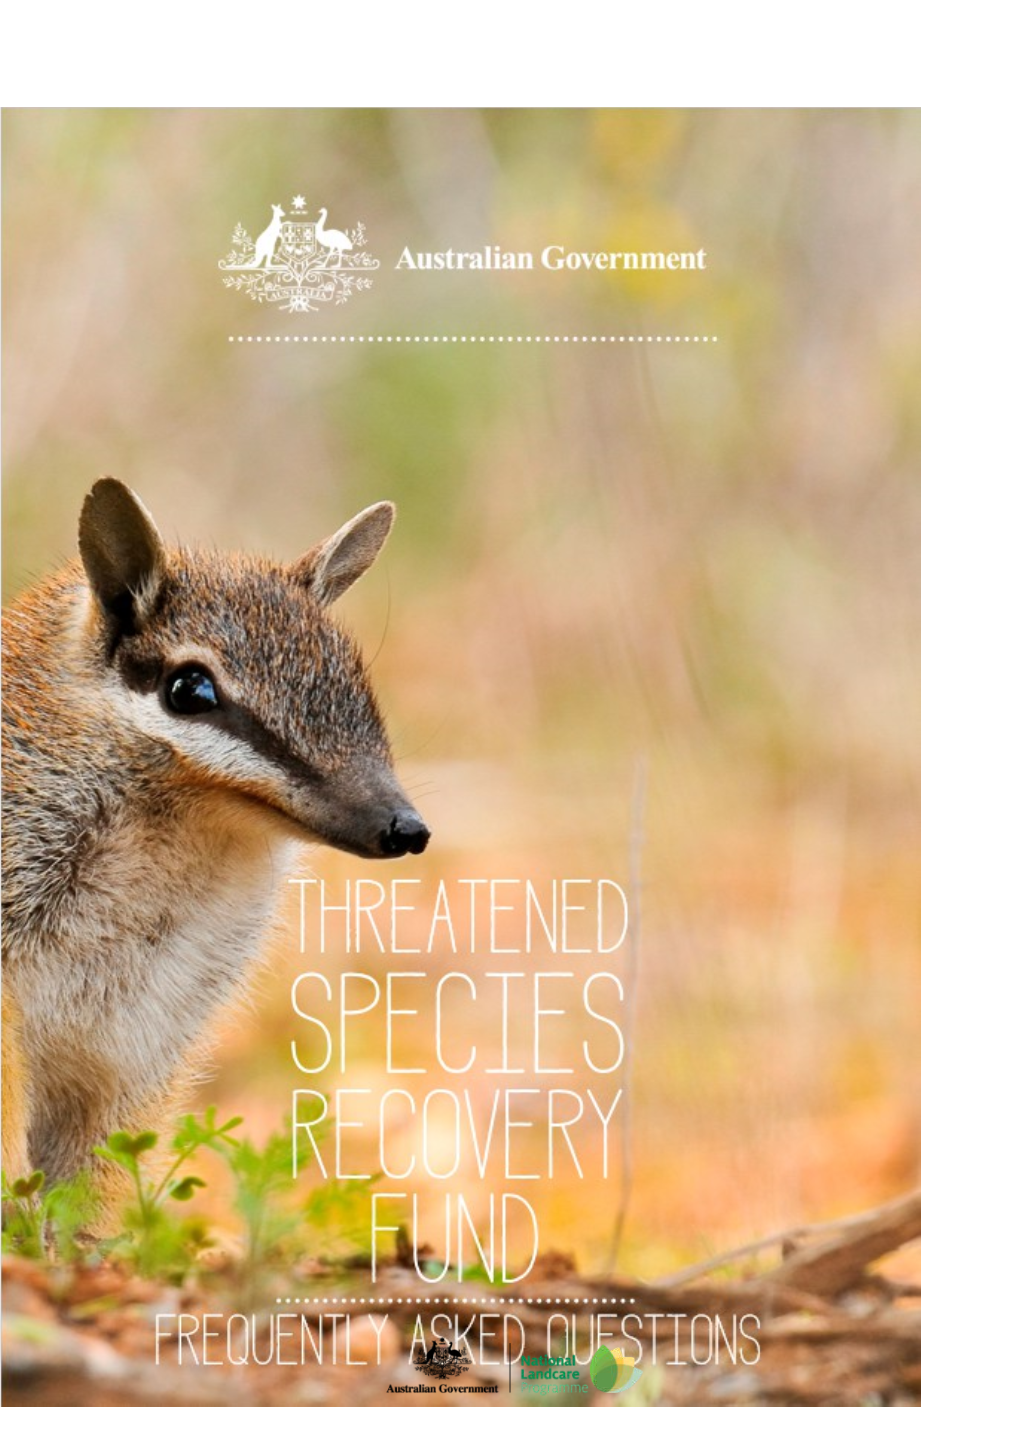 THREATENED SPECIES RECOVERY FUND Frequently Asked Questions